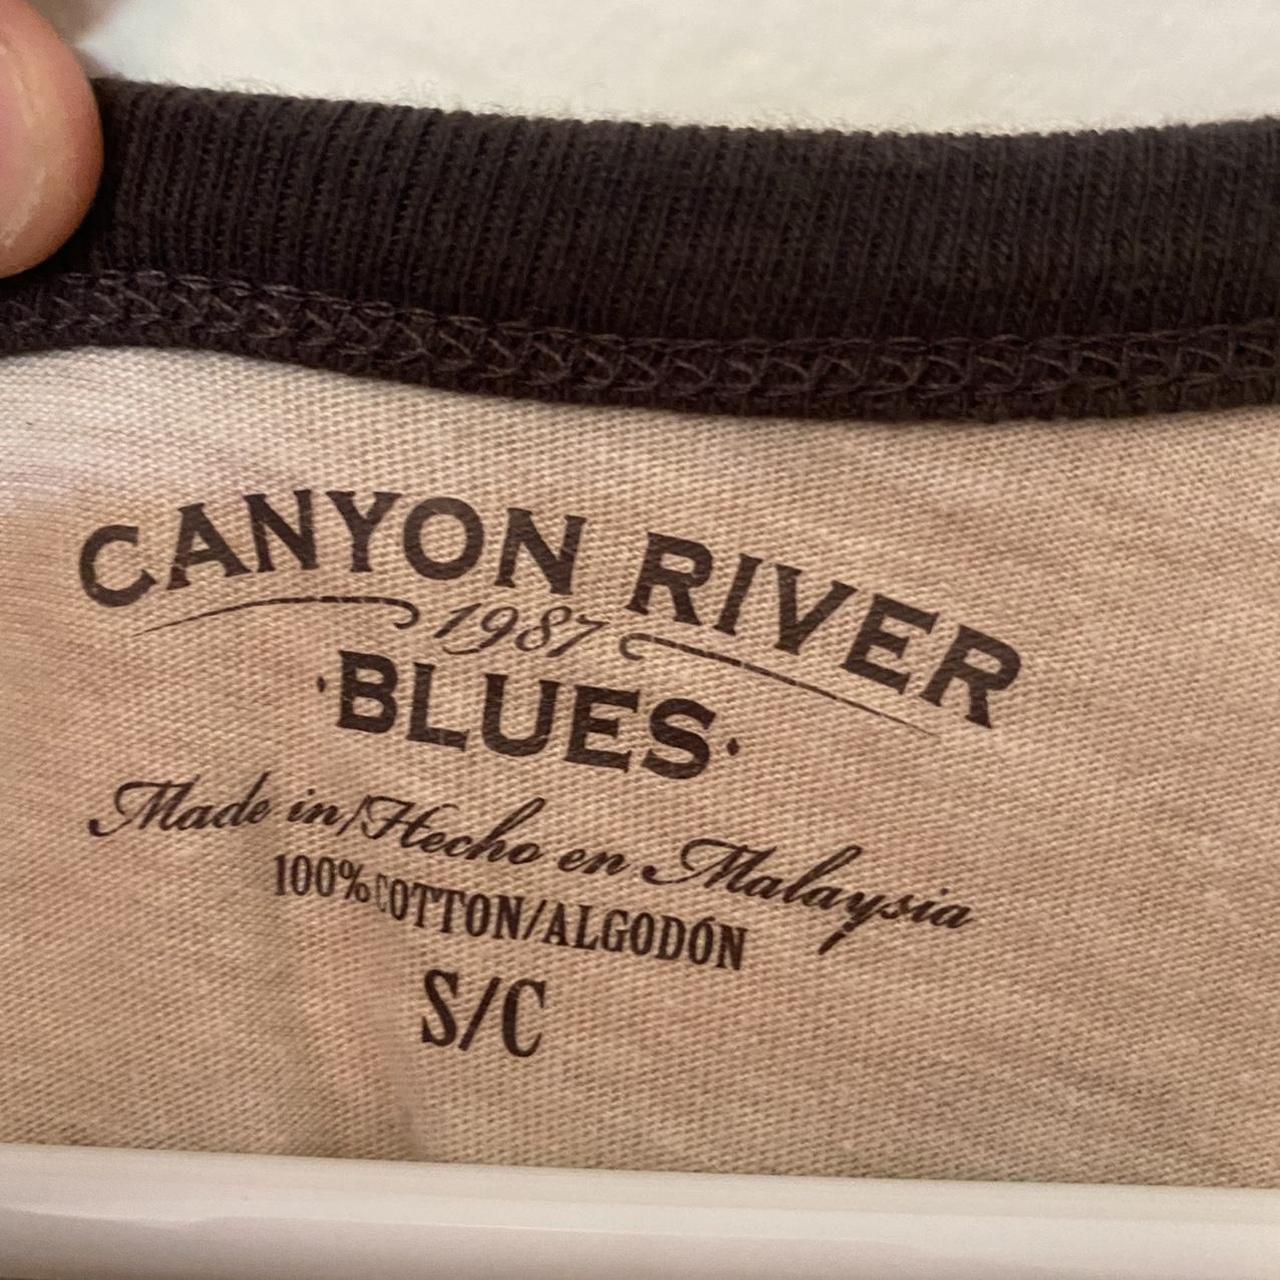 Canyon River Blues Men's Brown and Cream T-shirt (3)